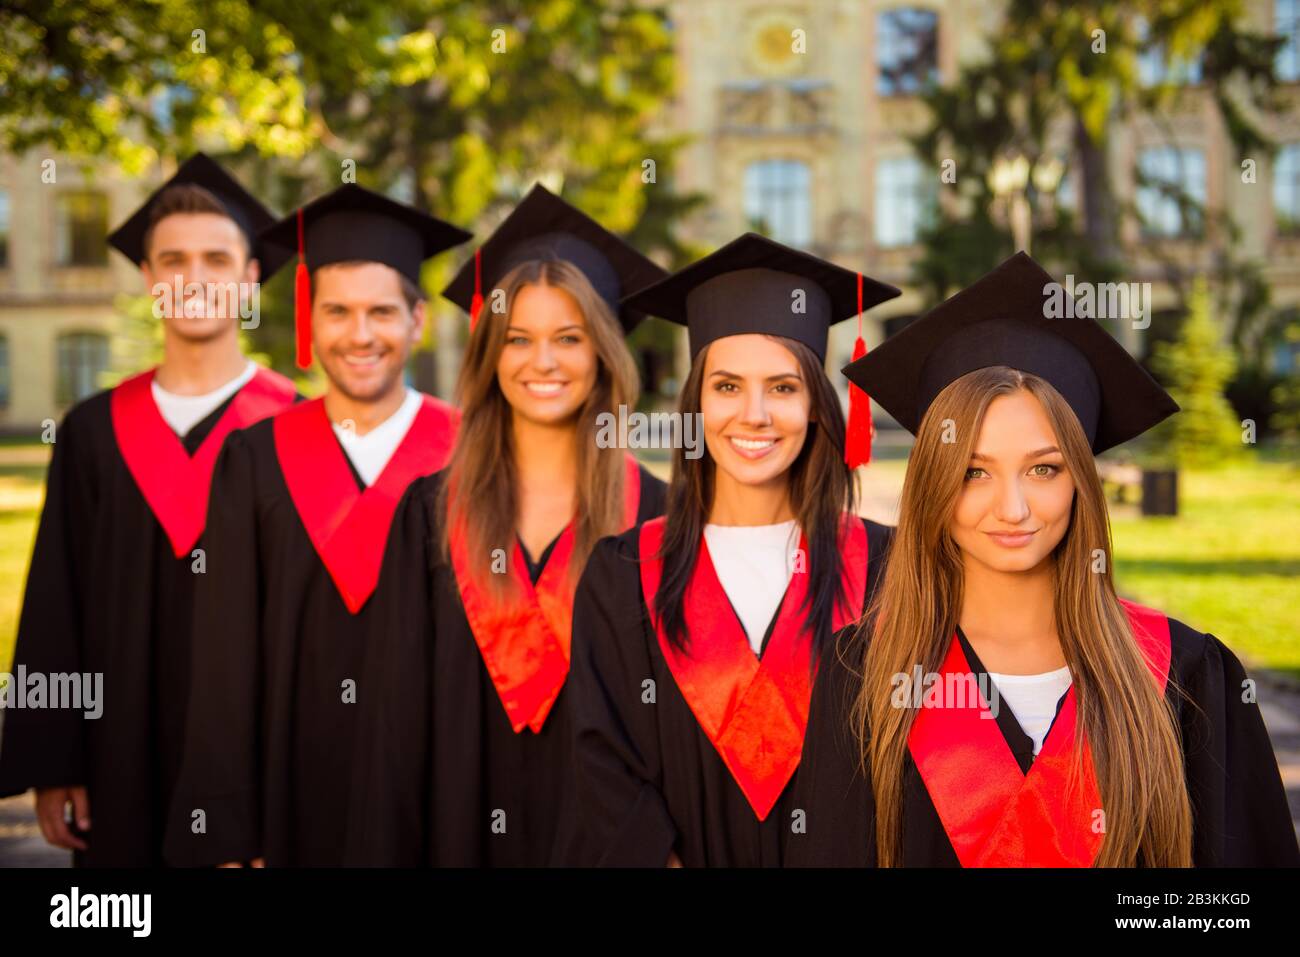 successful confident five graduates in robes and hats with tassel smiling Stock Photo